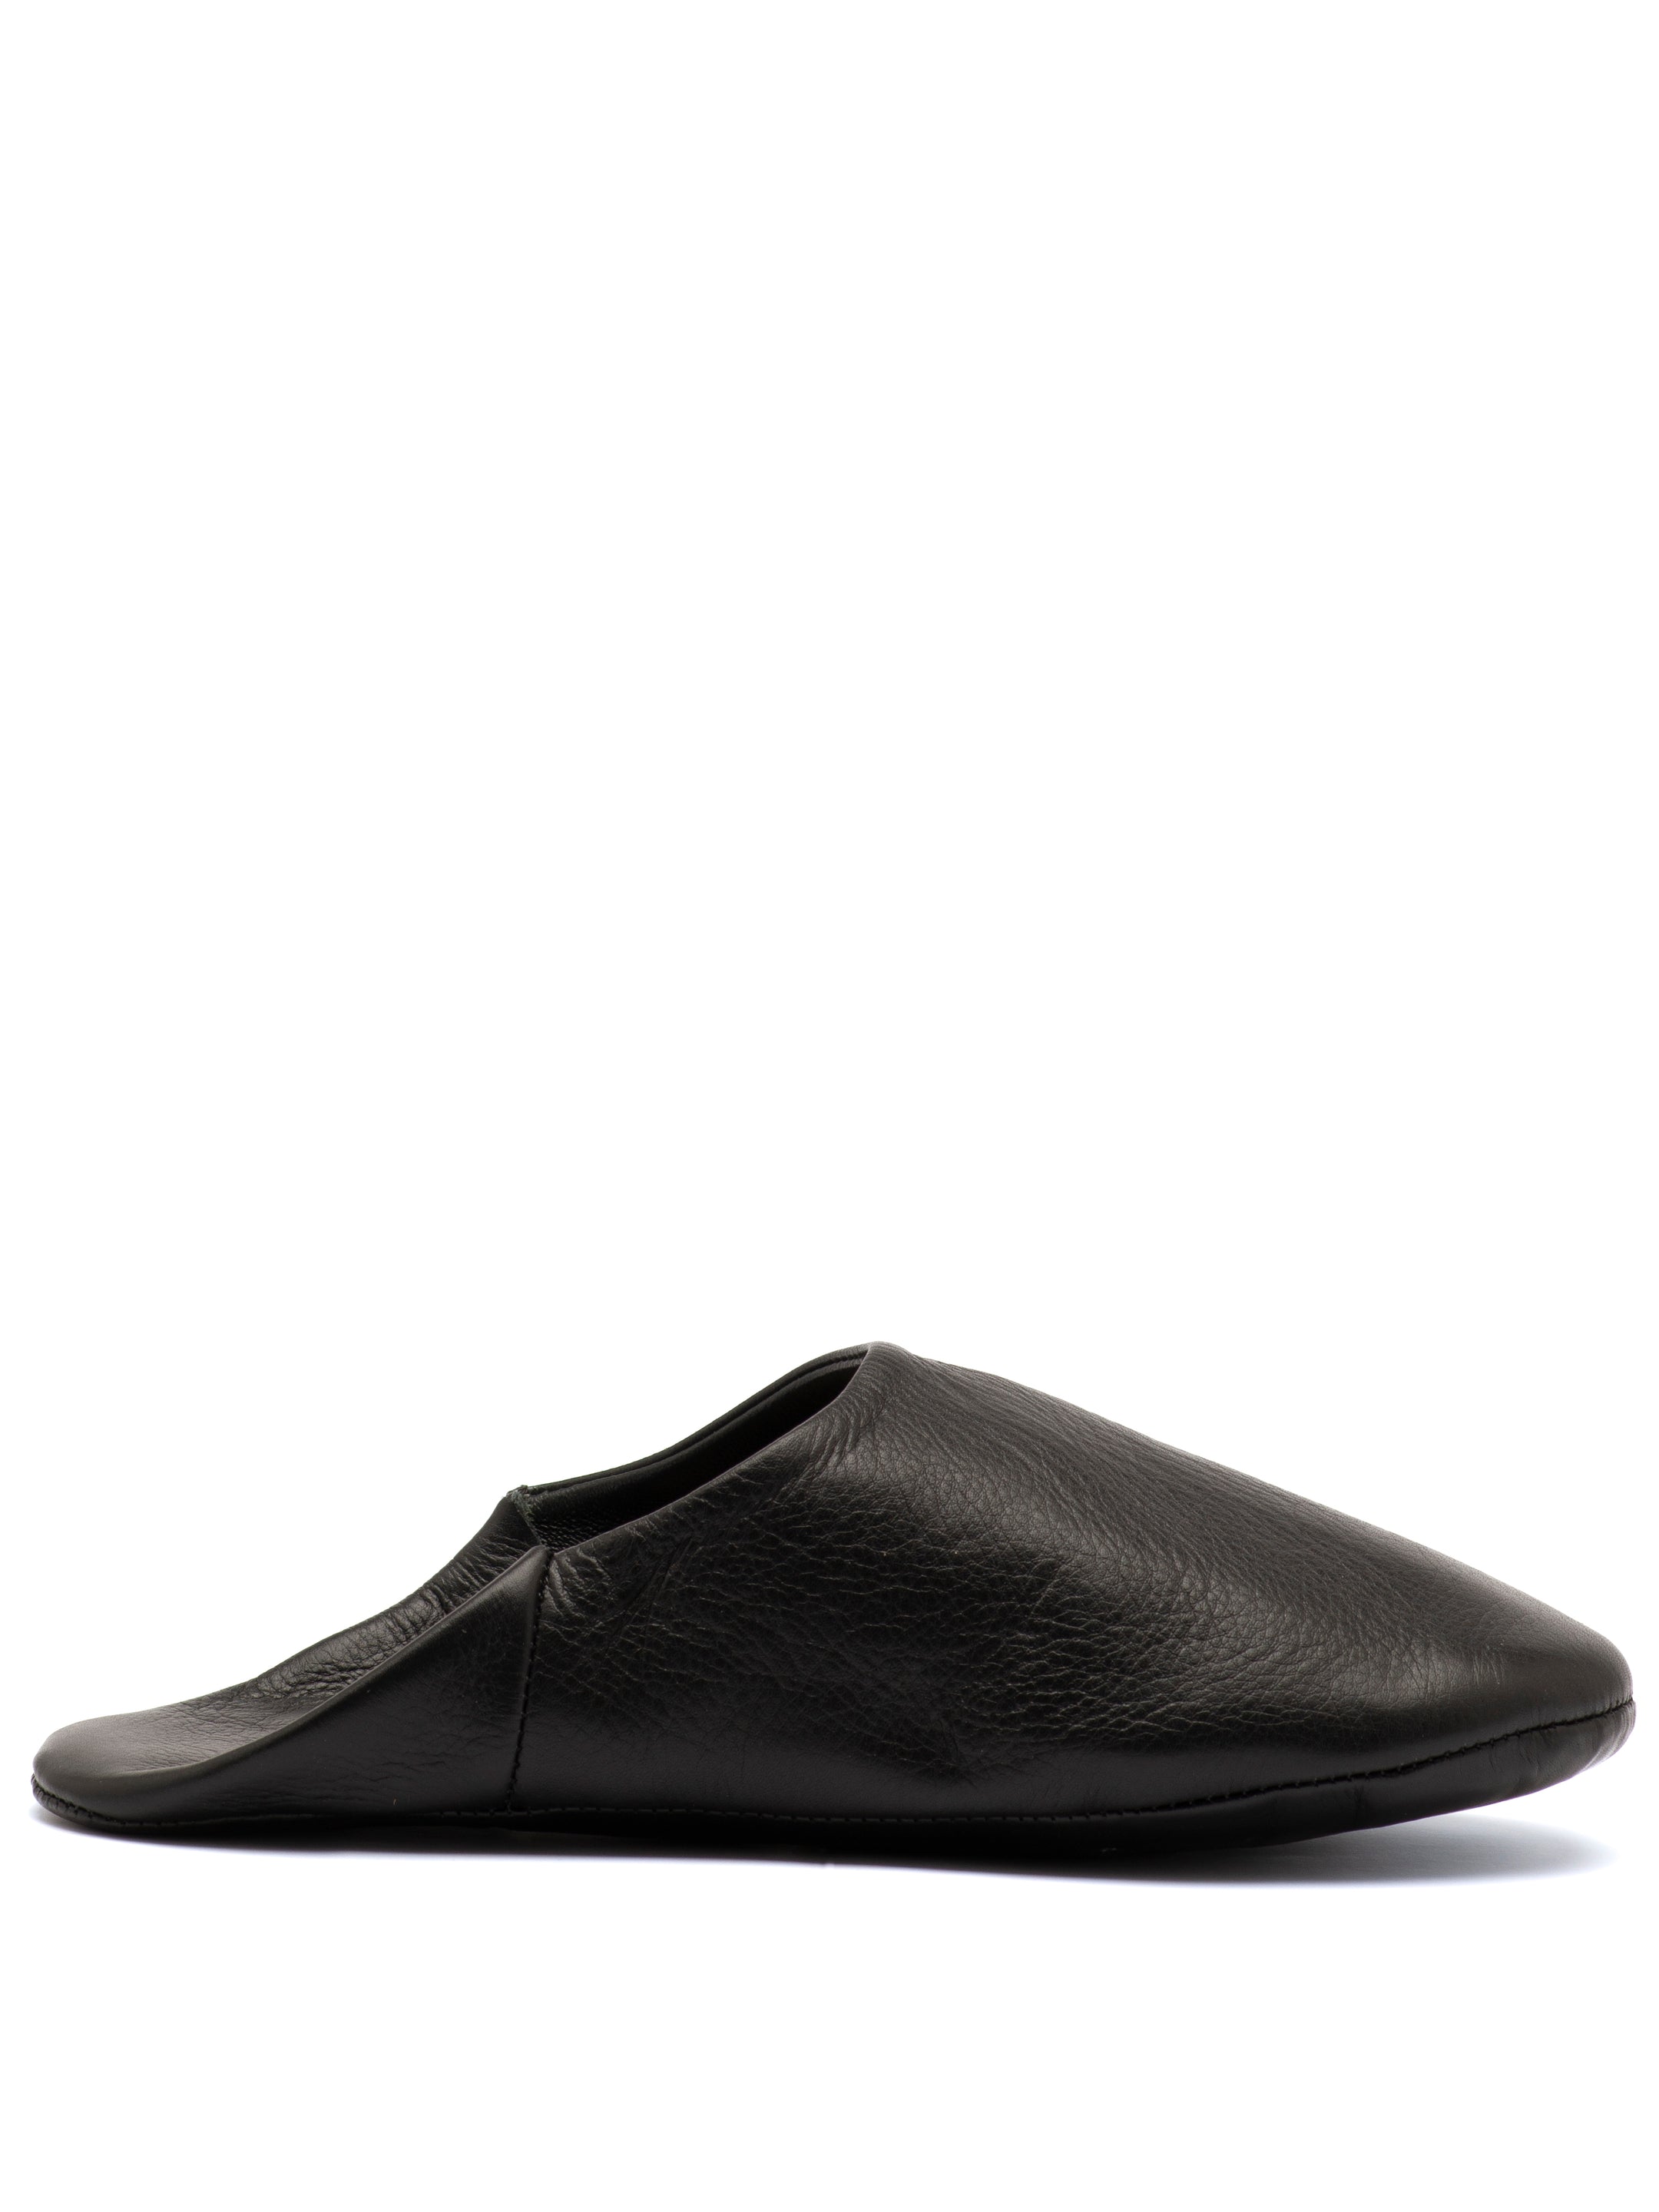 Mystic Noir - Leather Slippers